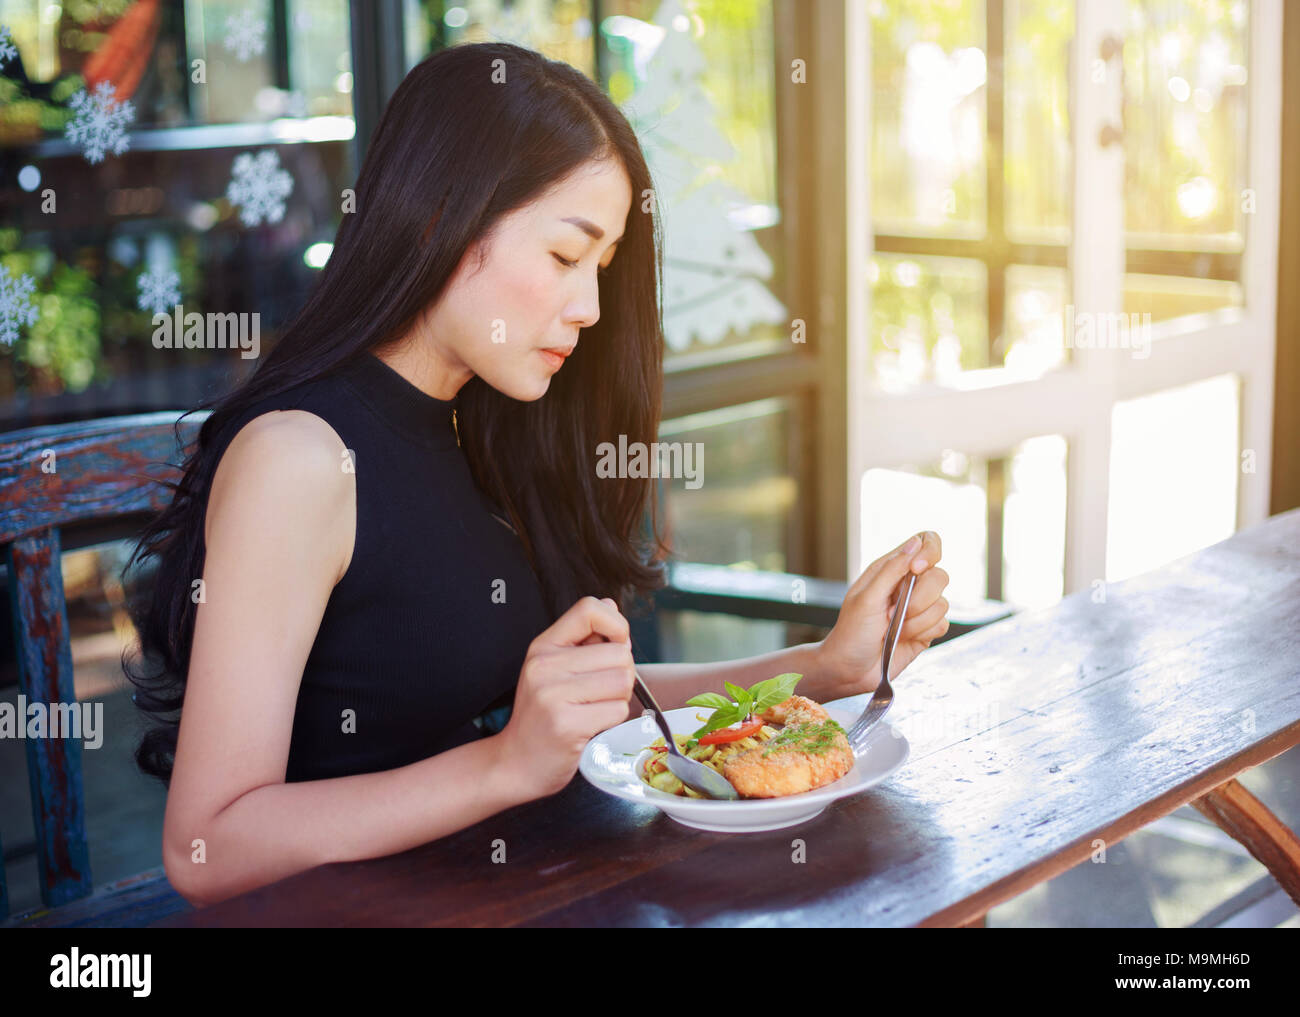 Young woman eating food in a restaurant Banque D'Images